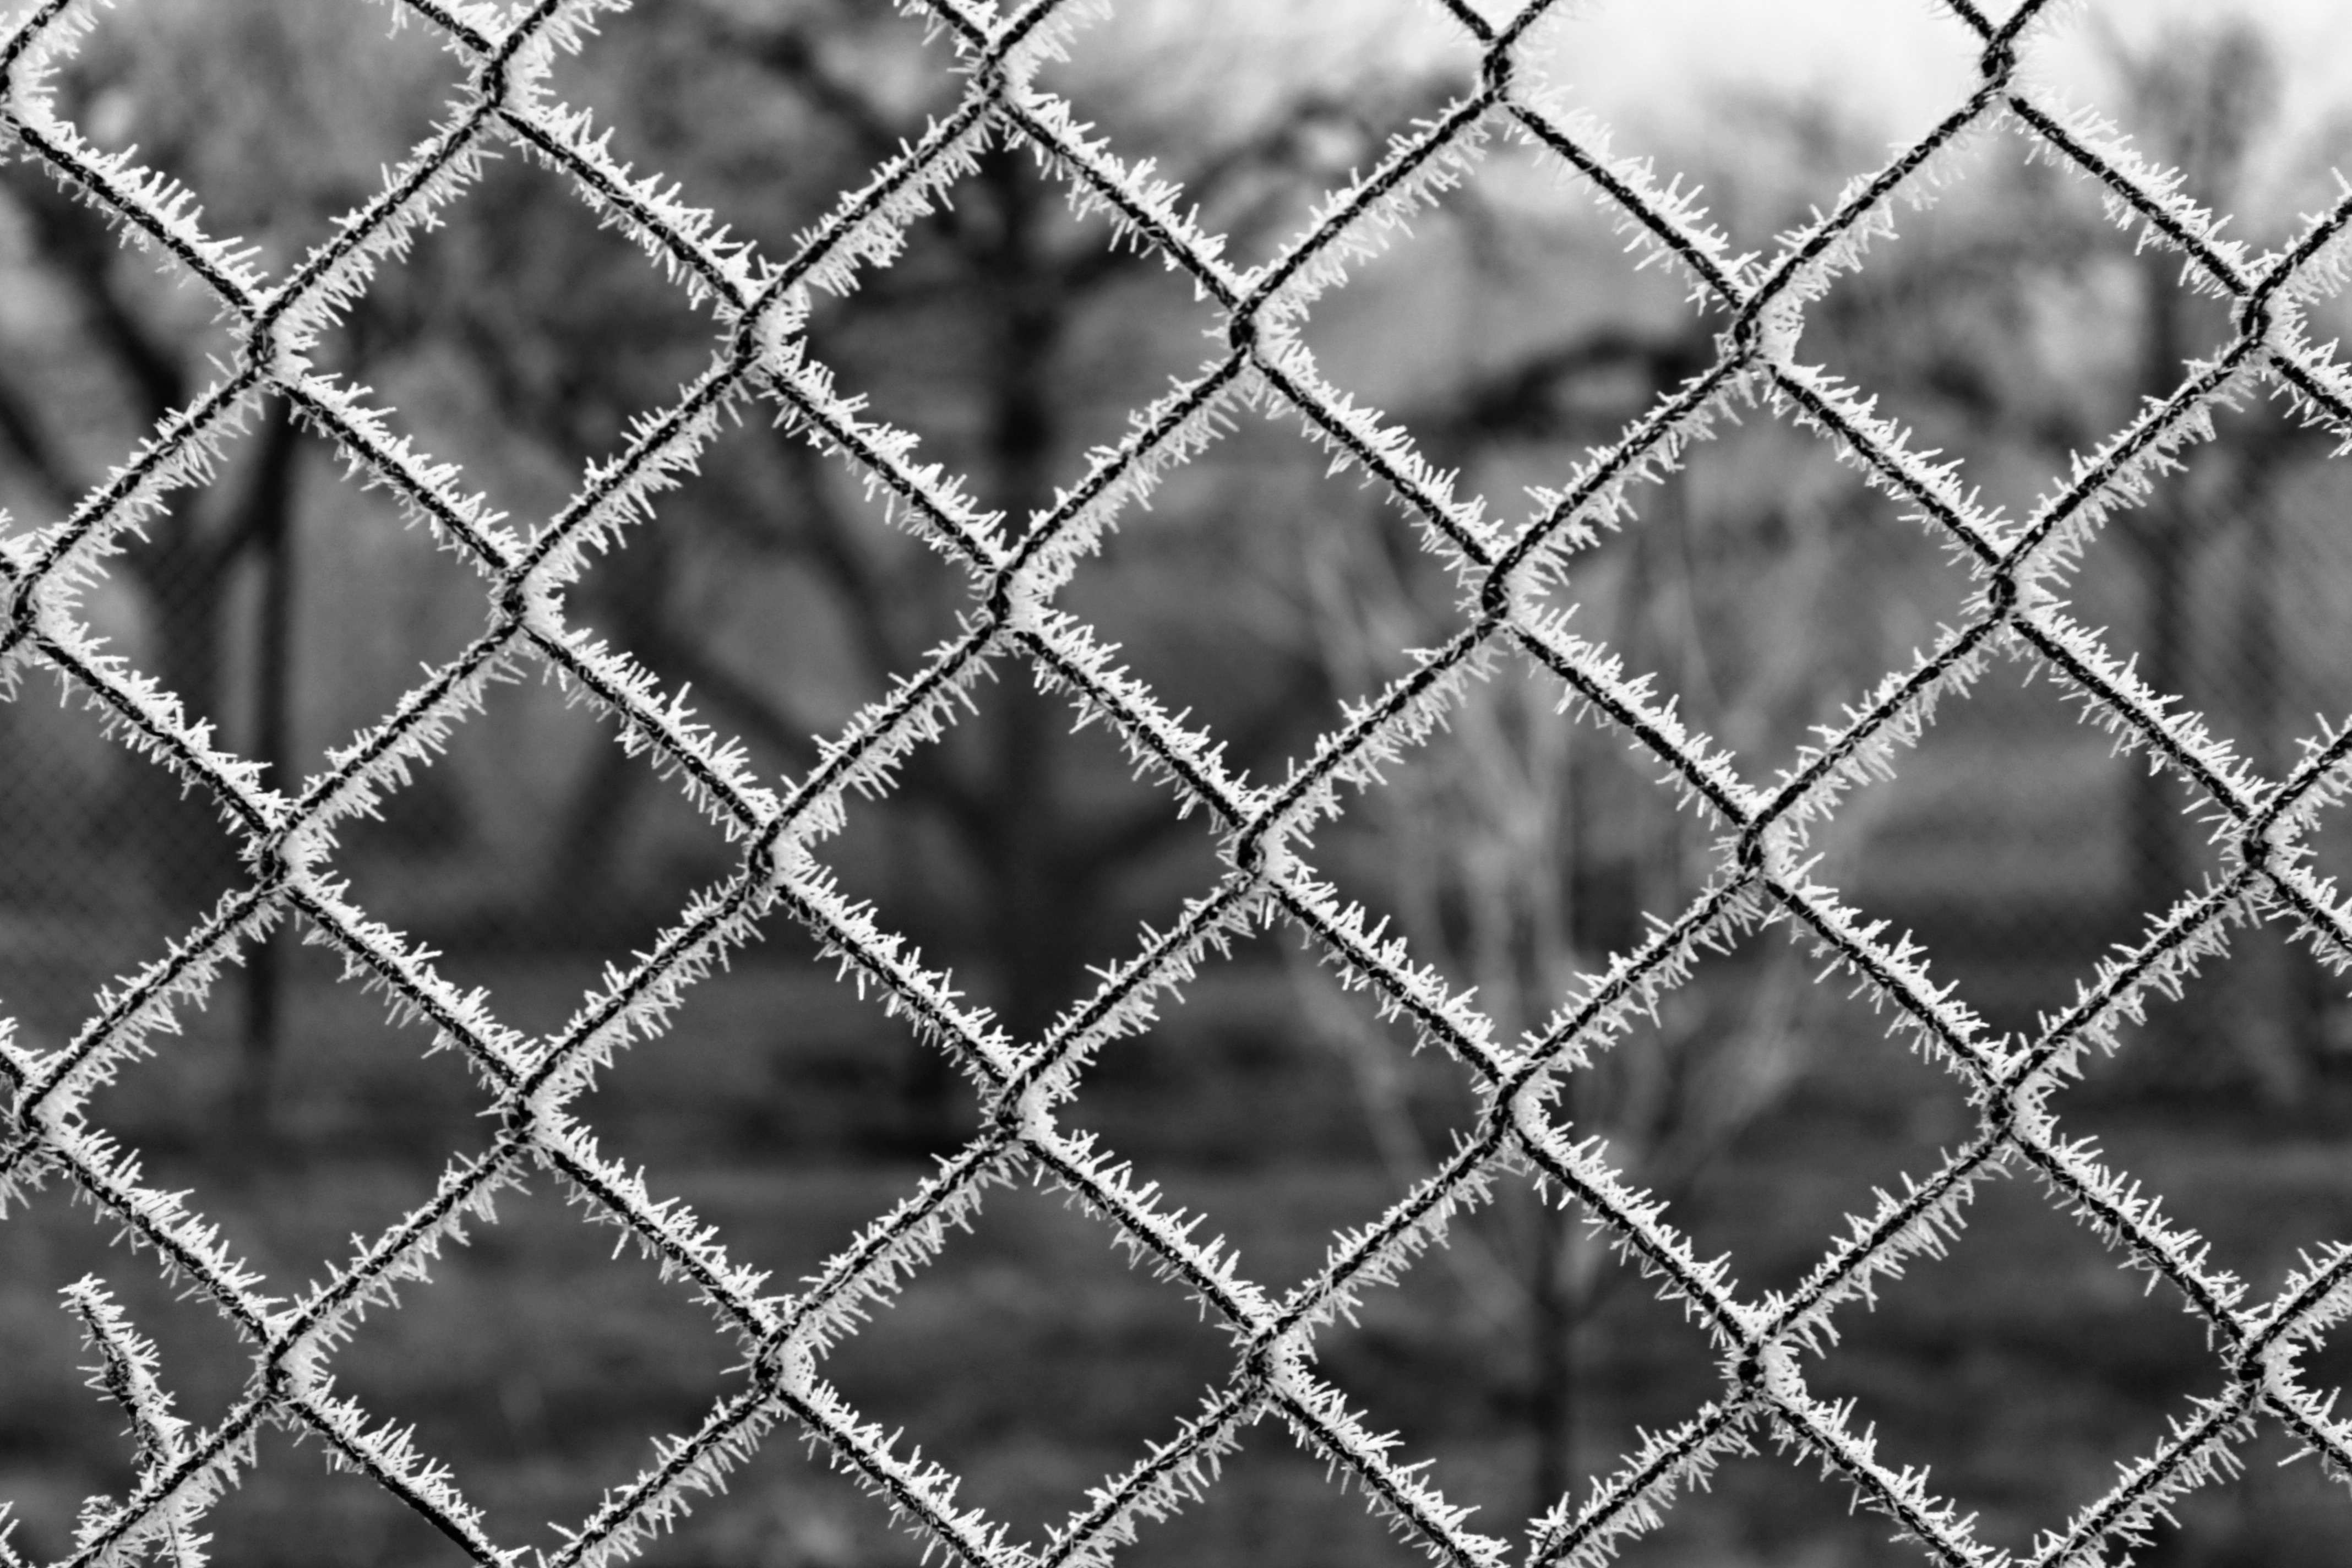 grey metal chain link fence